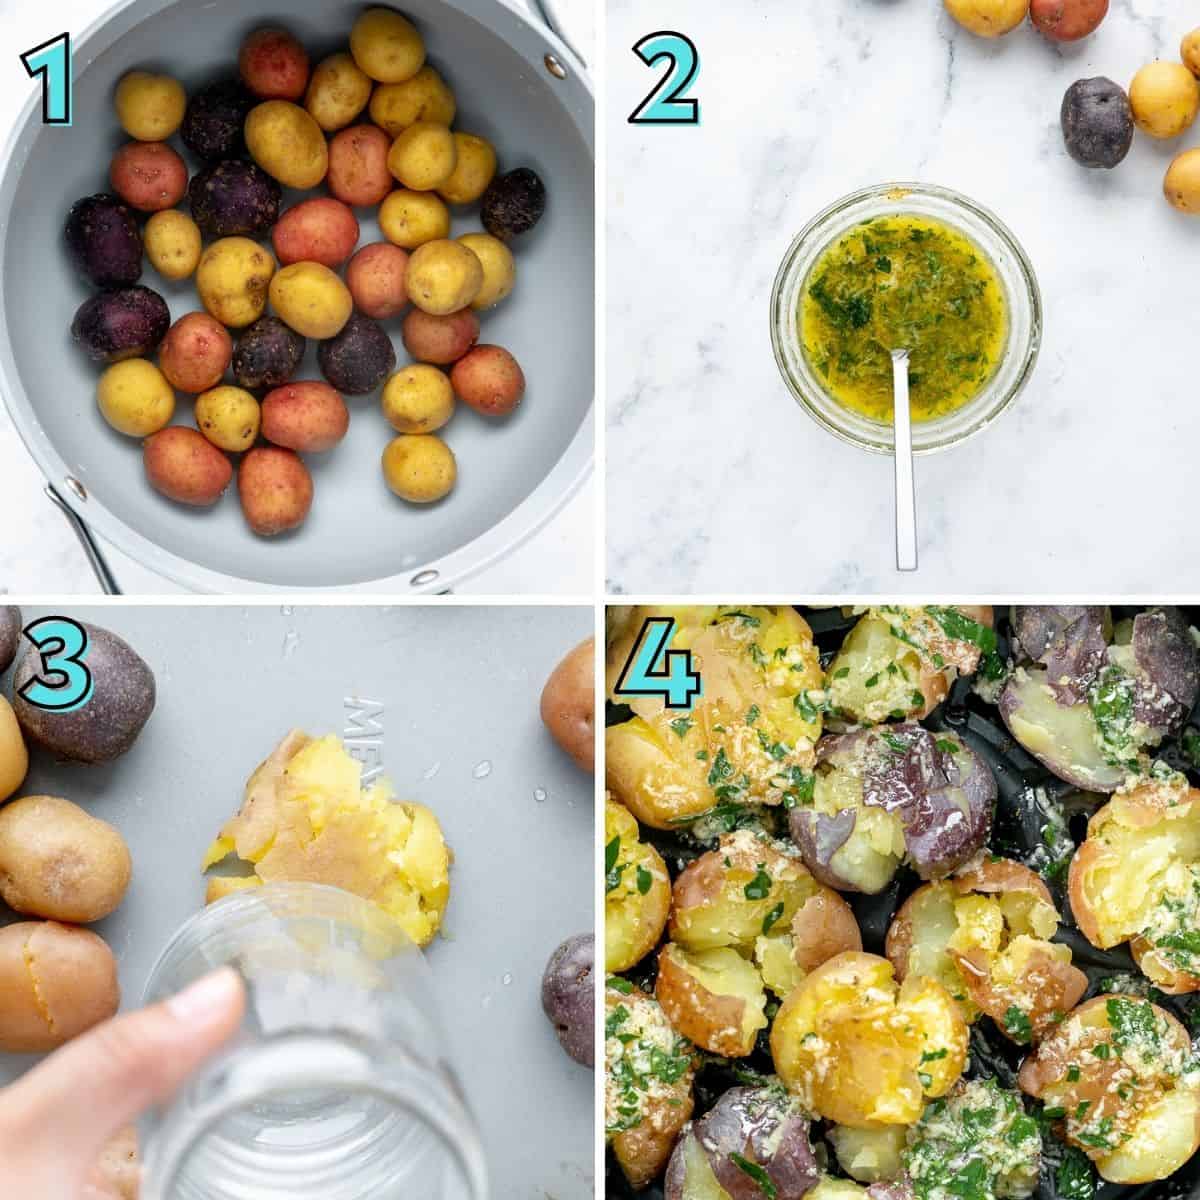 Step by step instructions to prepare smashed potatoes, in a collage.